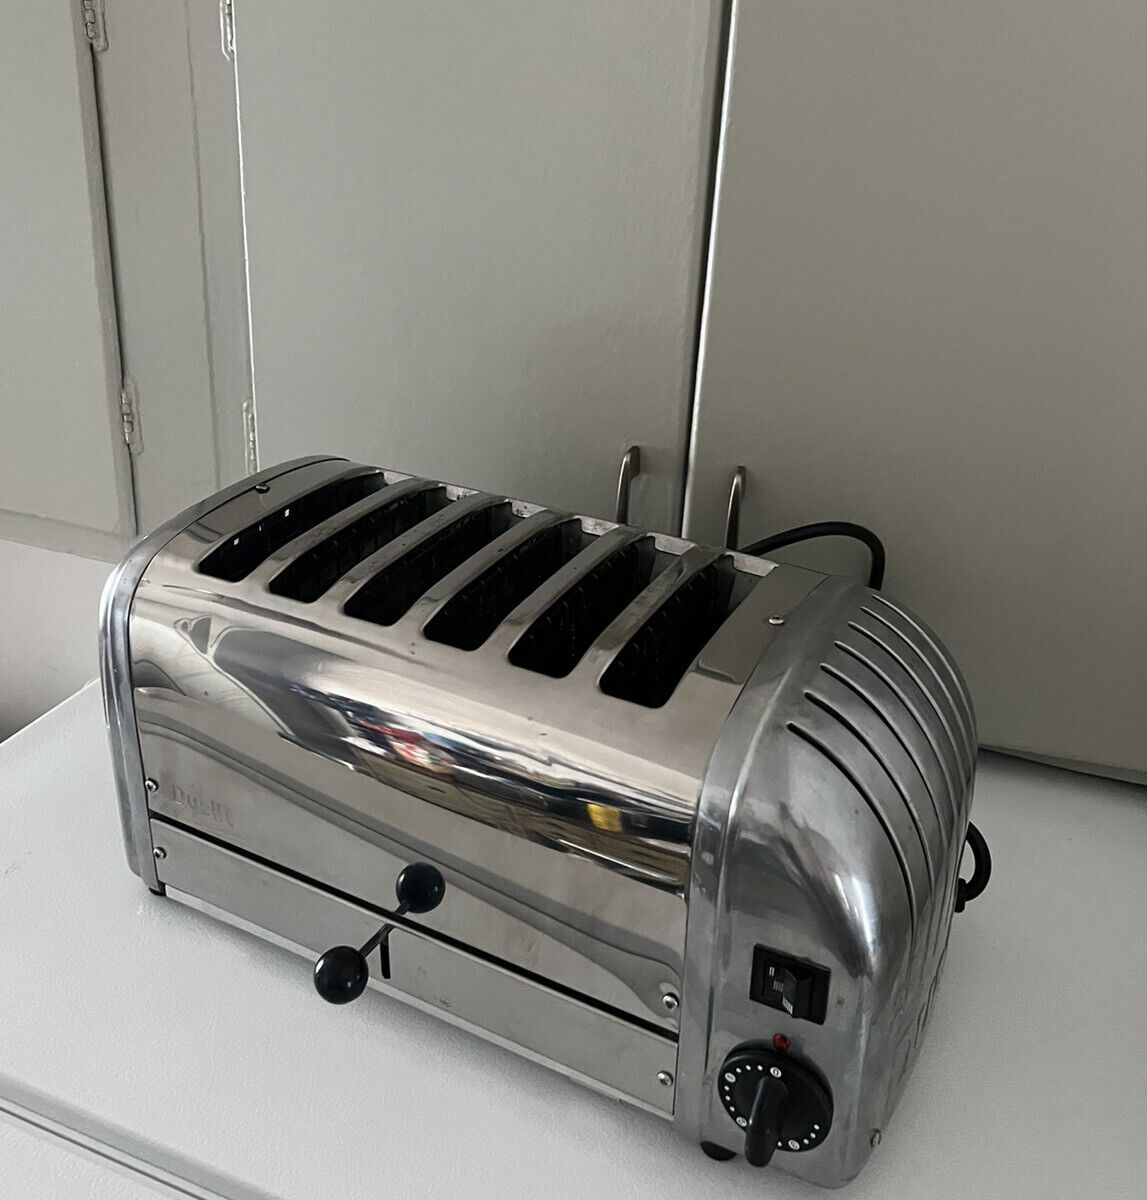 Dualit Classic Slot Toaster 6-slicechrome Stainless Steel Tested Works Vintage